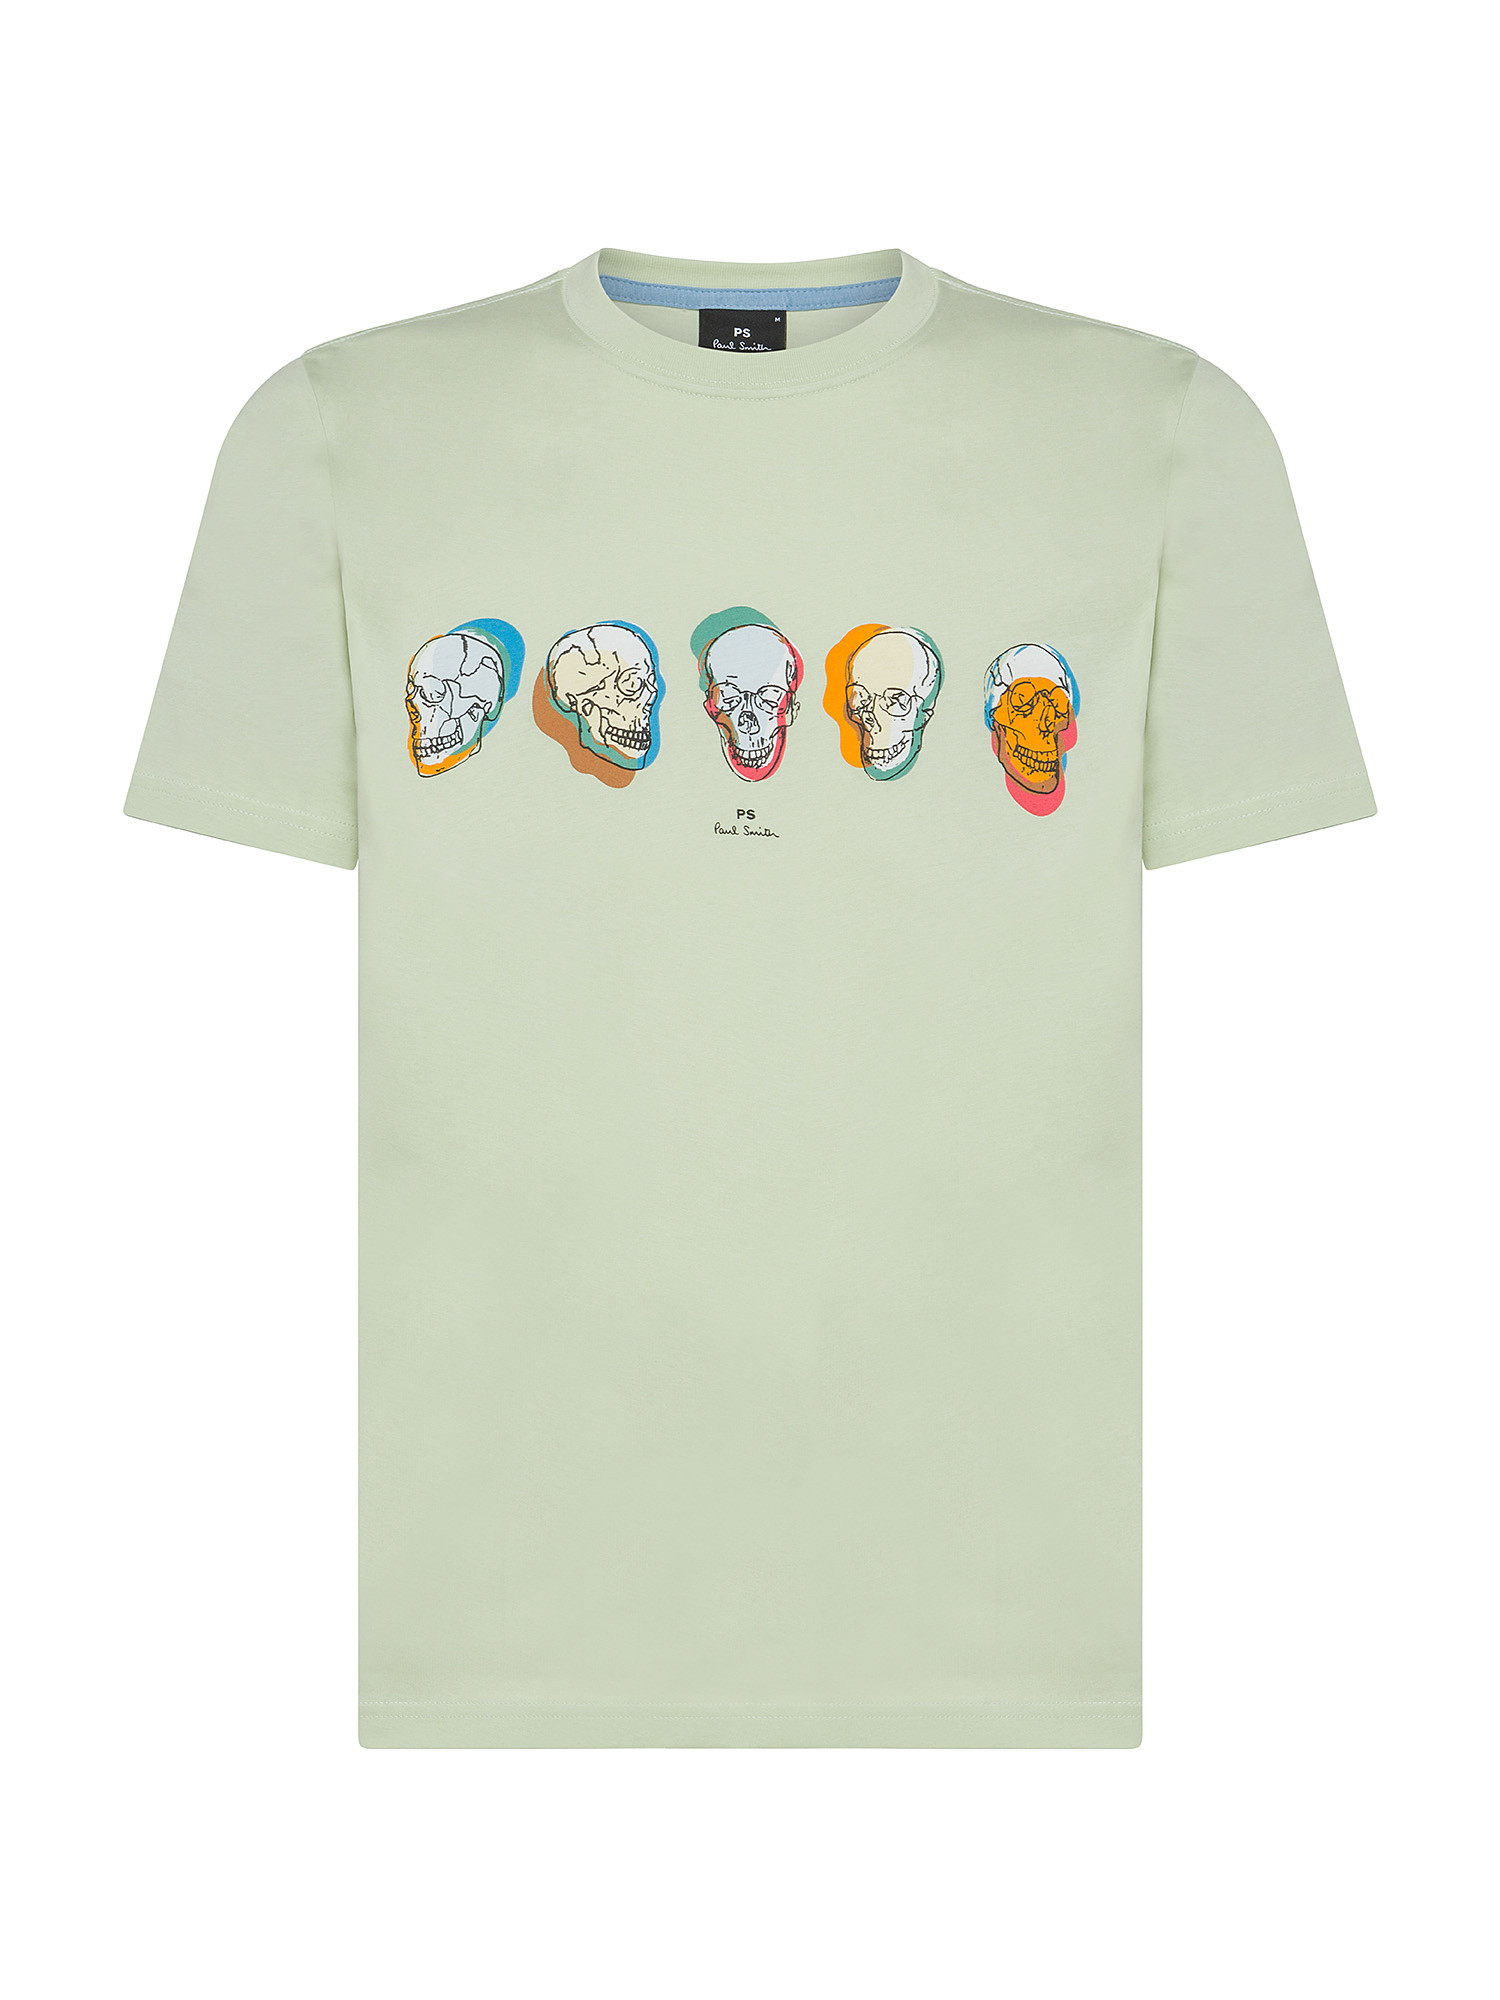 Paul Smith - T-shirt in cotone con stampa teschi, Verde, large image number 0